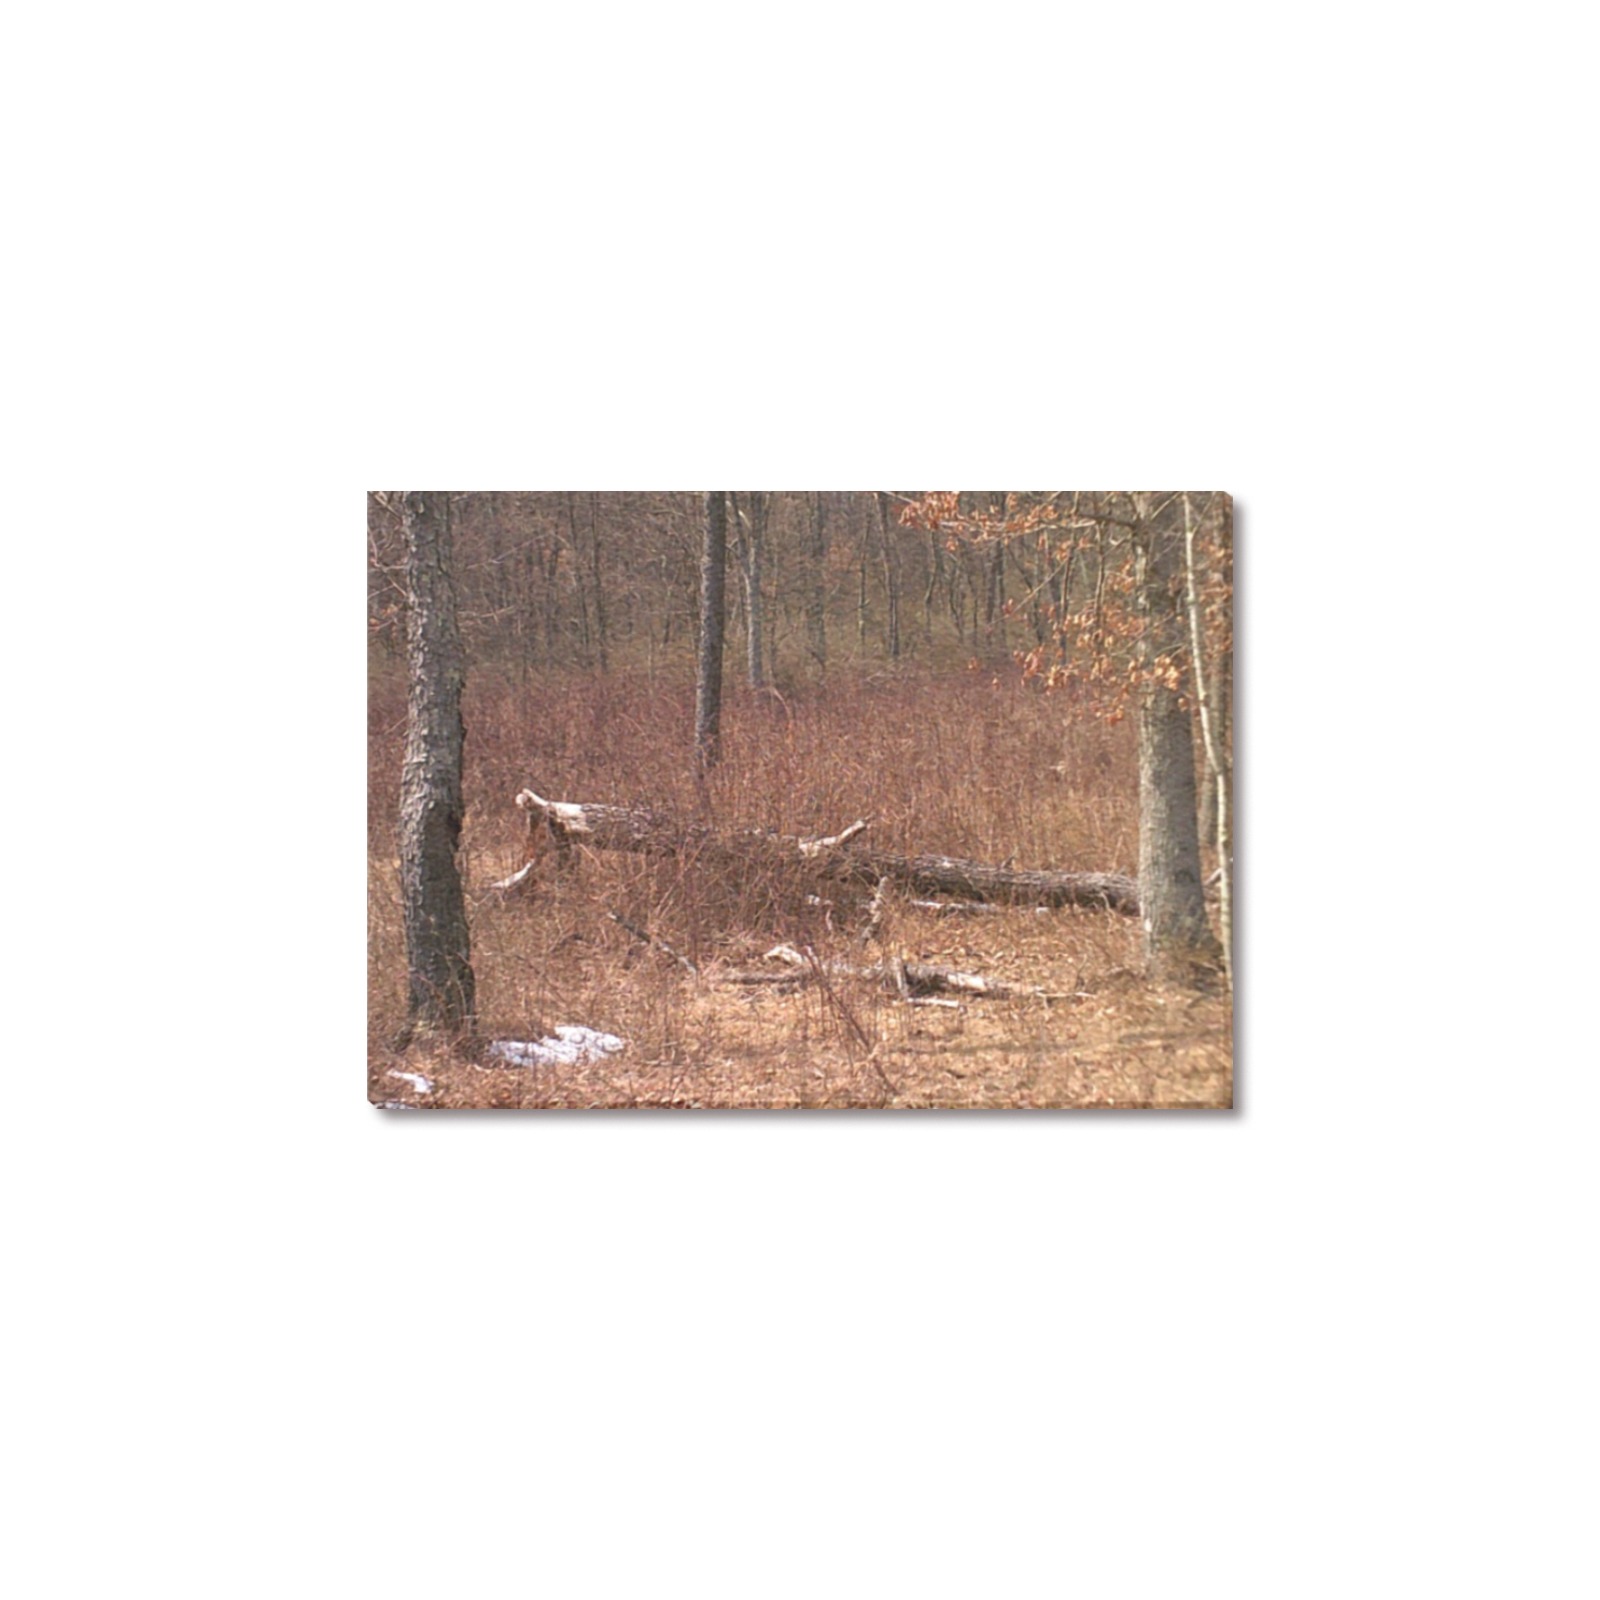 Falling tree in the woods Upgraded Canvas Print 7"x5"